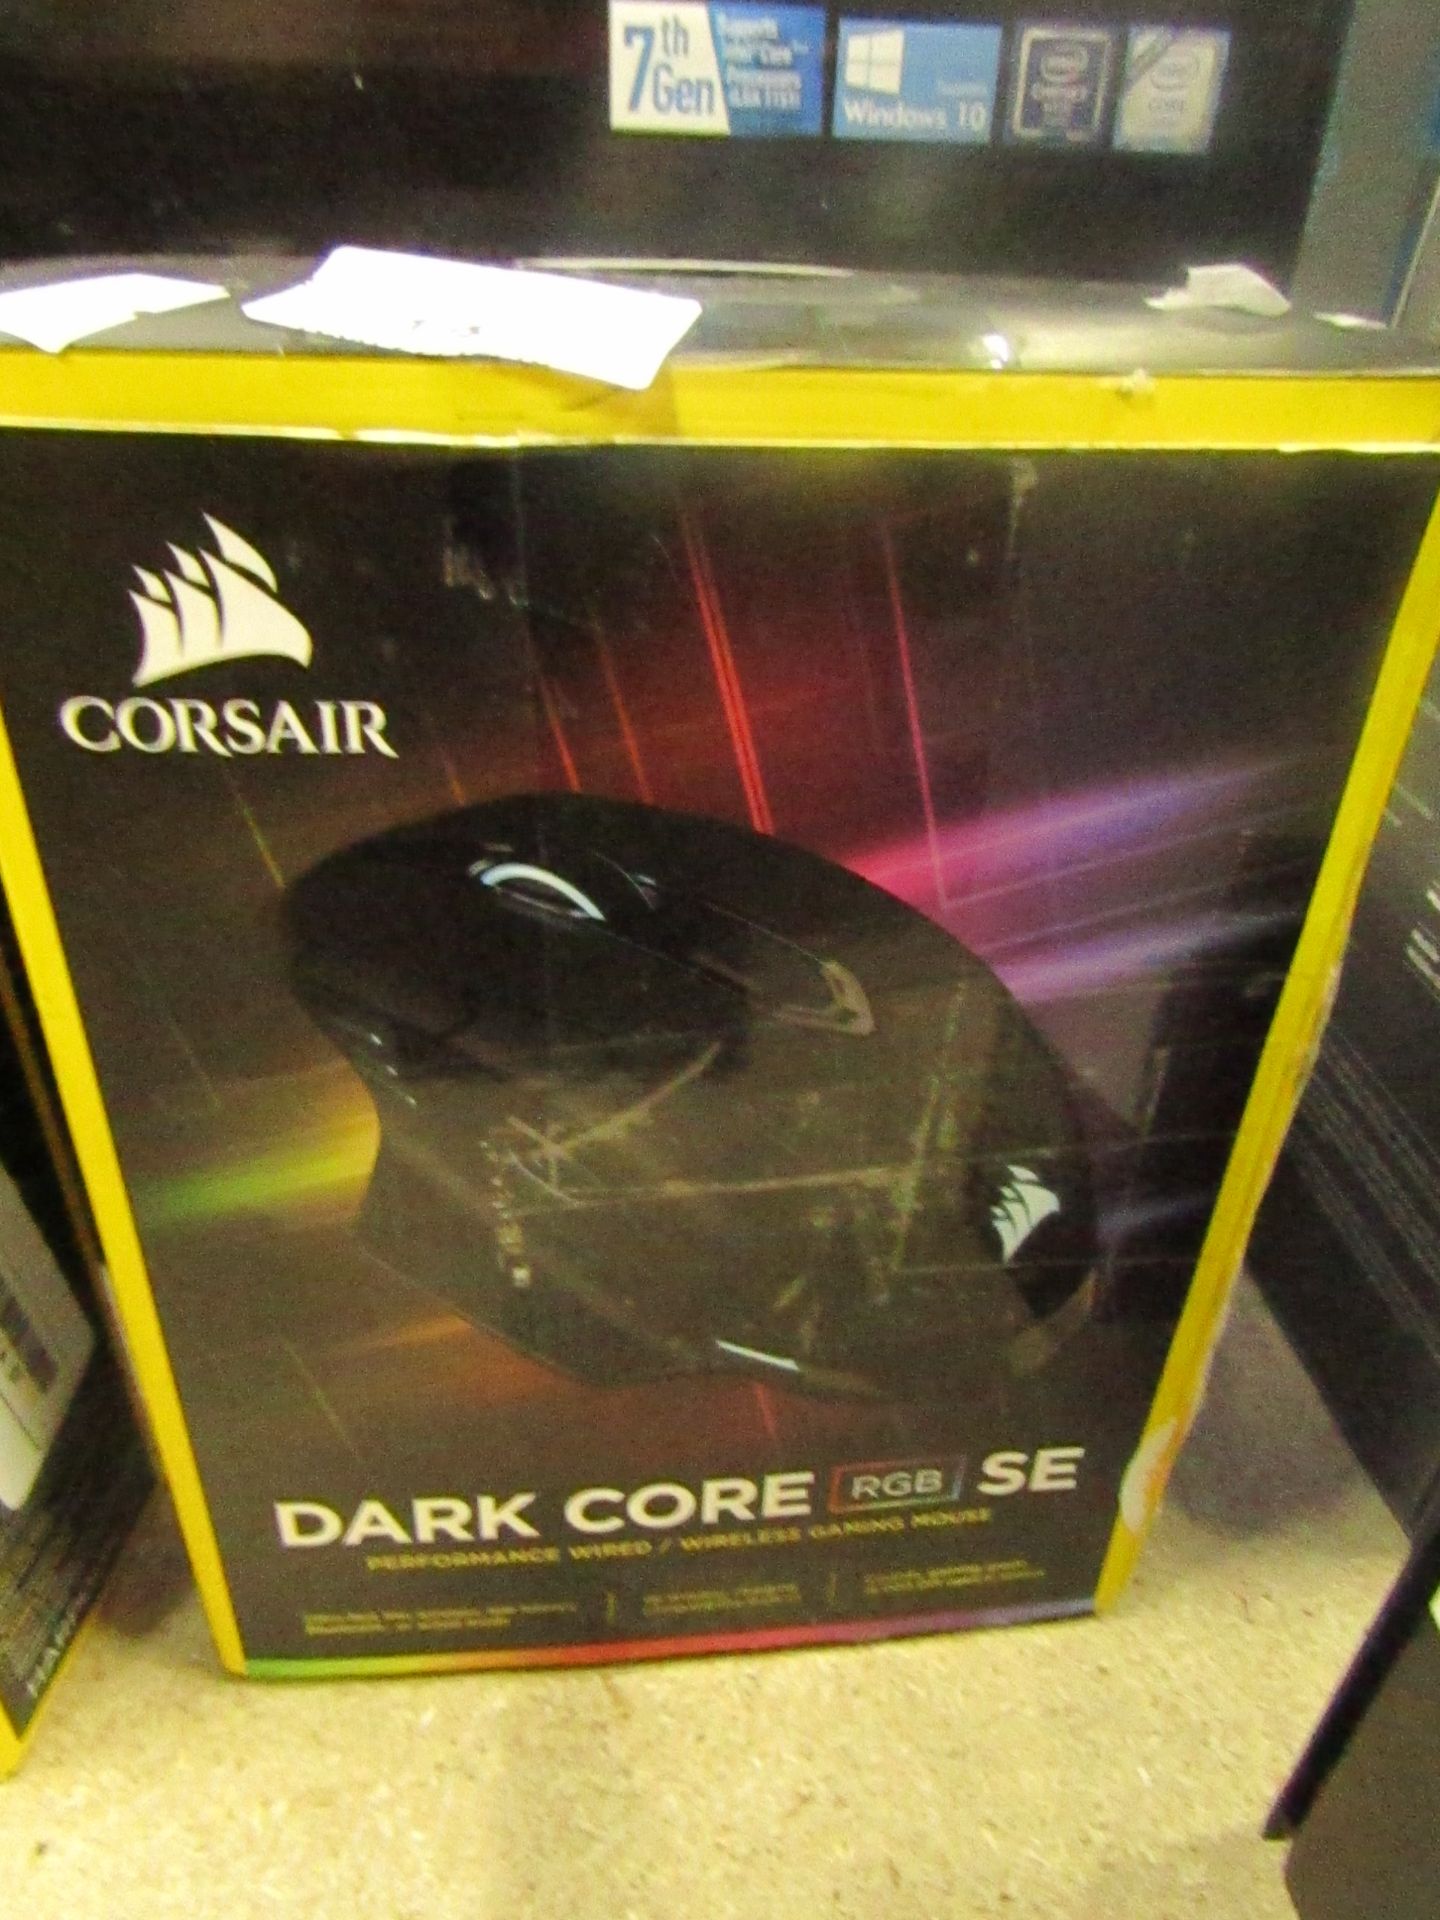 Corsair Dark Core RGB SE performance wireless gaming mouse, tested working, RRP £75.00